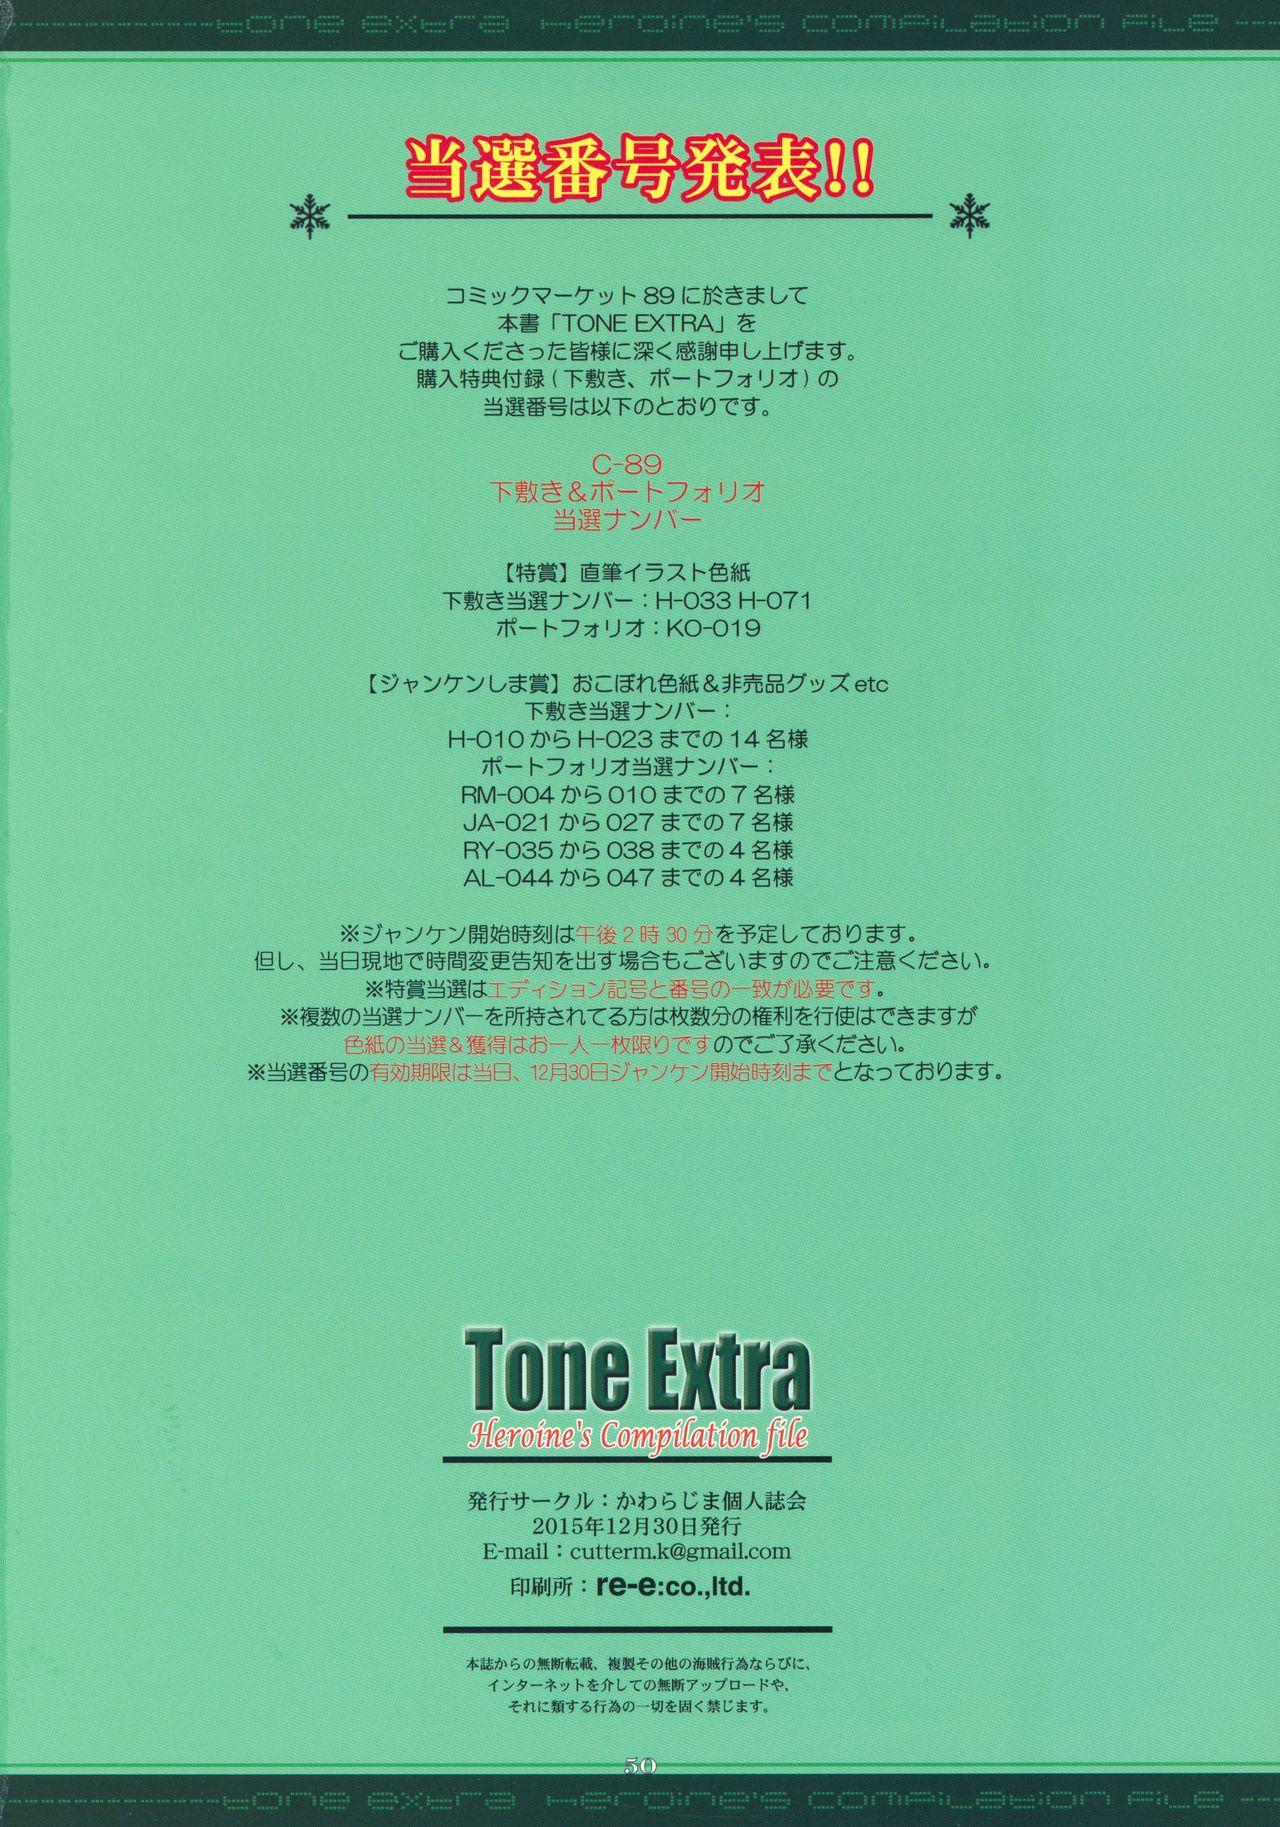 Cougars Tone Extra Heroine's Compilation File - Space battleship yamato 2199 Czech - Page 49